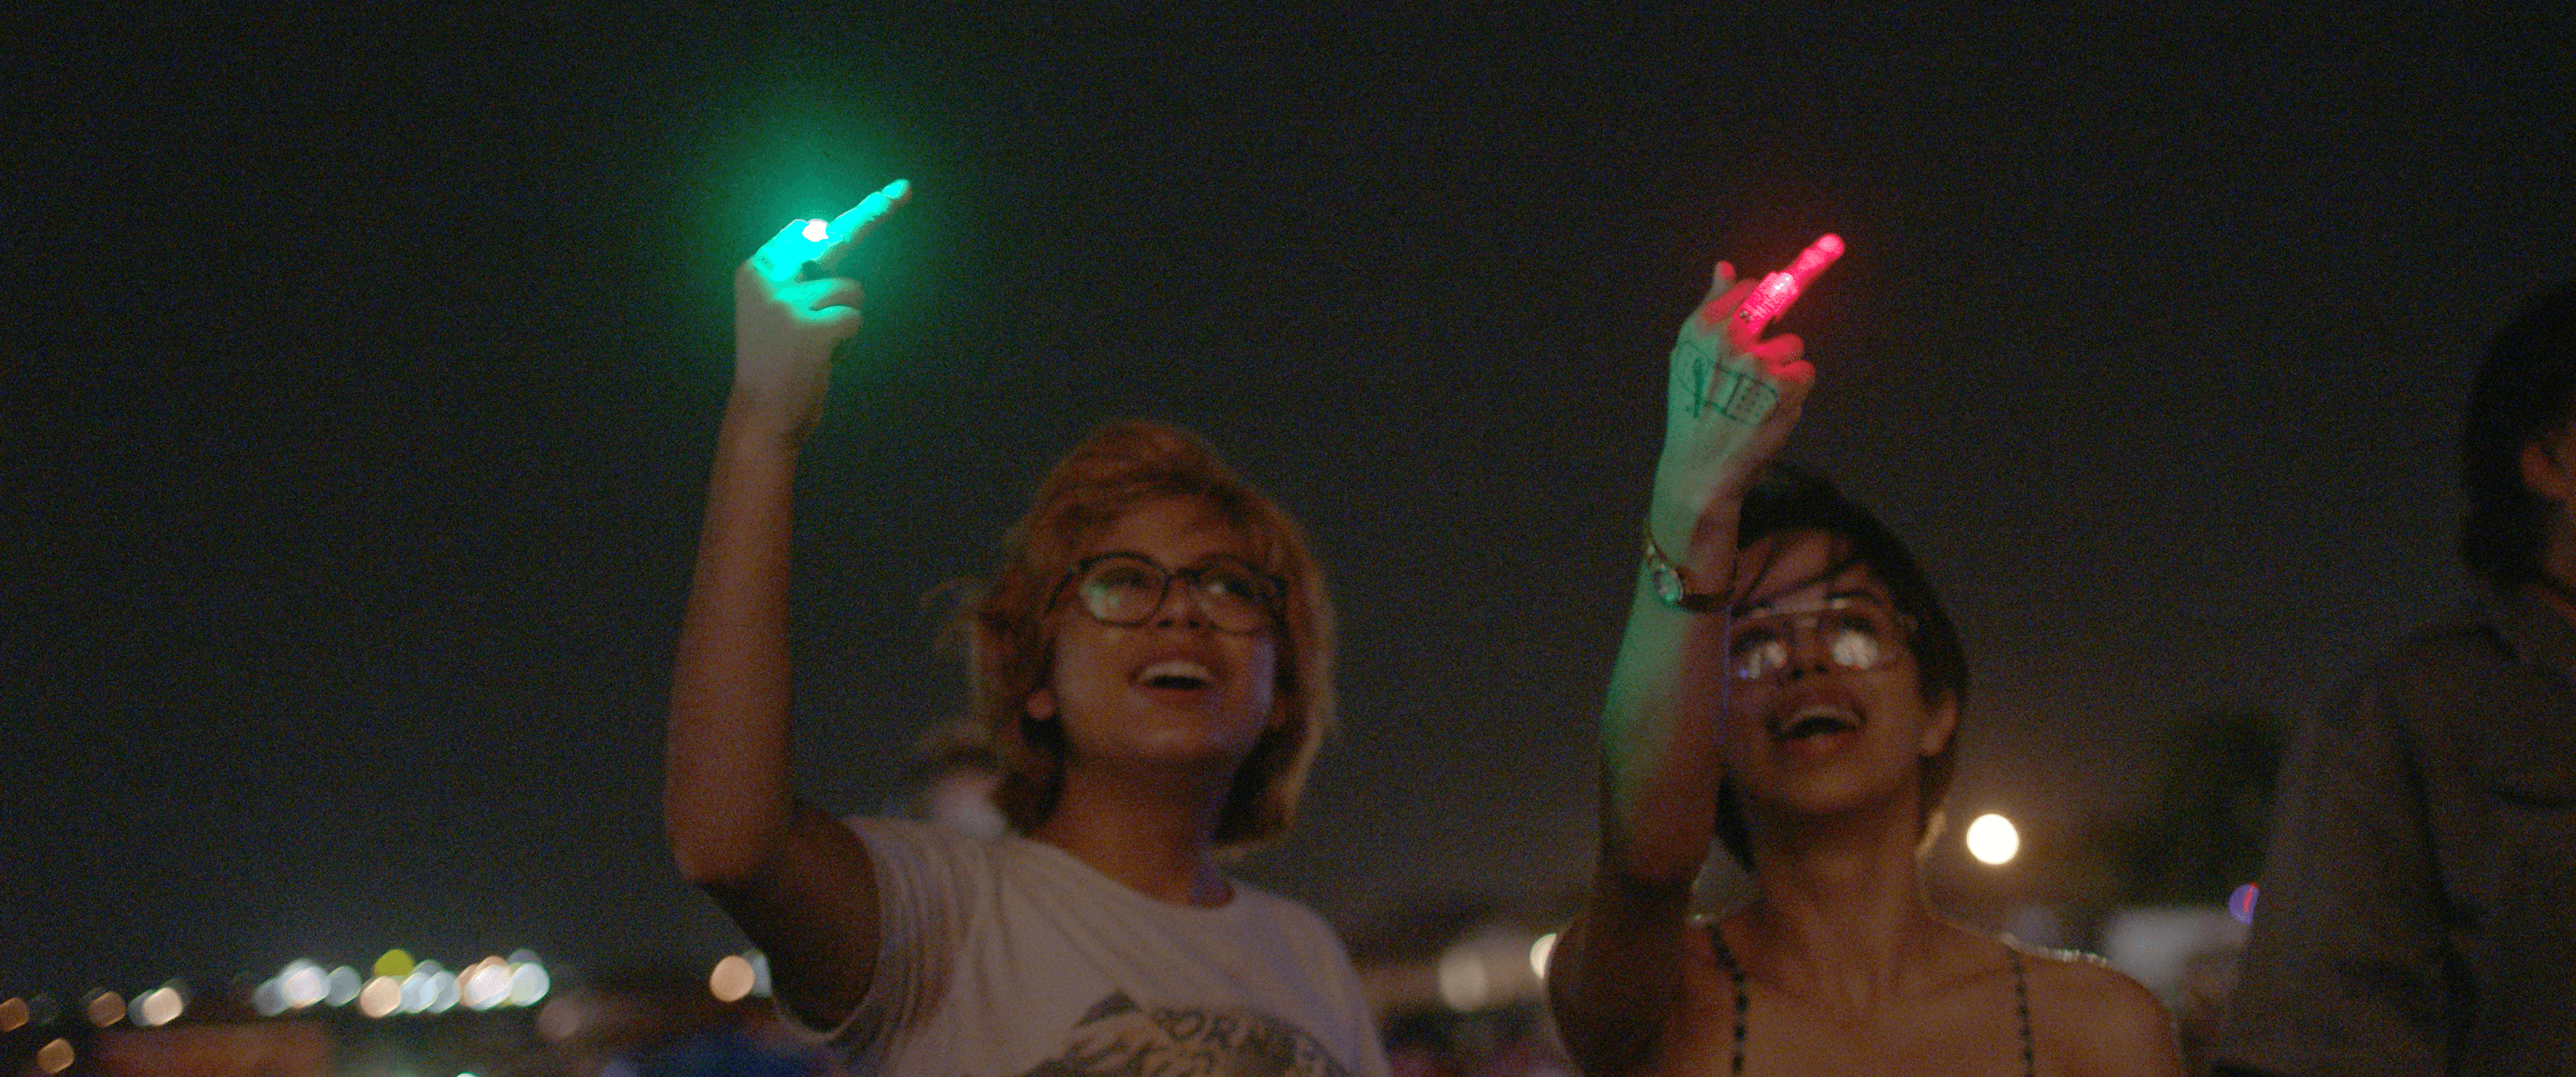 Silvia and Beba smile as they point their middle finger at the fire-work lit sky. There is a red light on Beba's middle finger, and a green light on Silvia's.